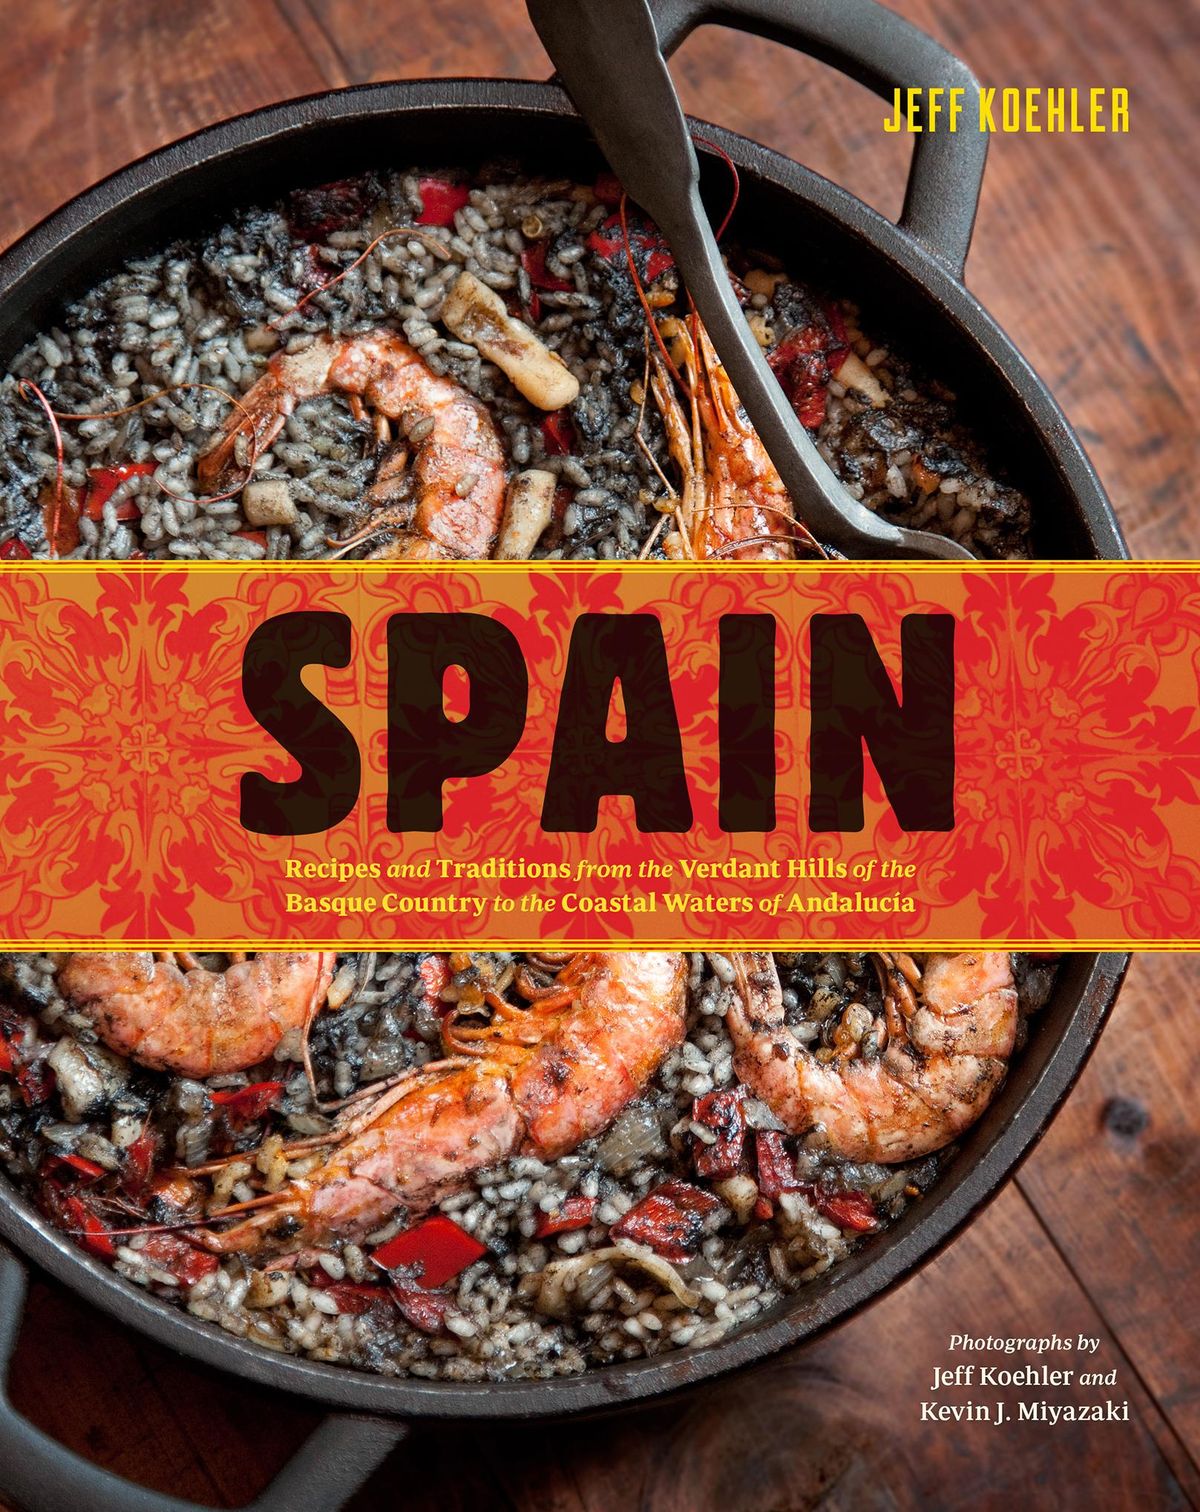 The book cover of "Spain" by Jeff Koehler features a paella dish. (COURTESY PHOTO / COURTESY PHOTO)